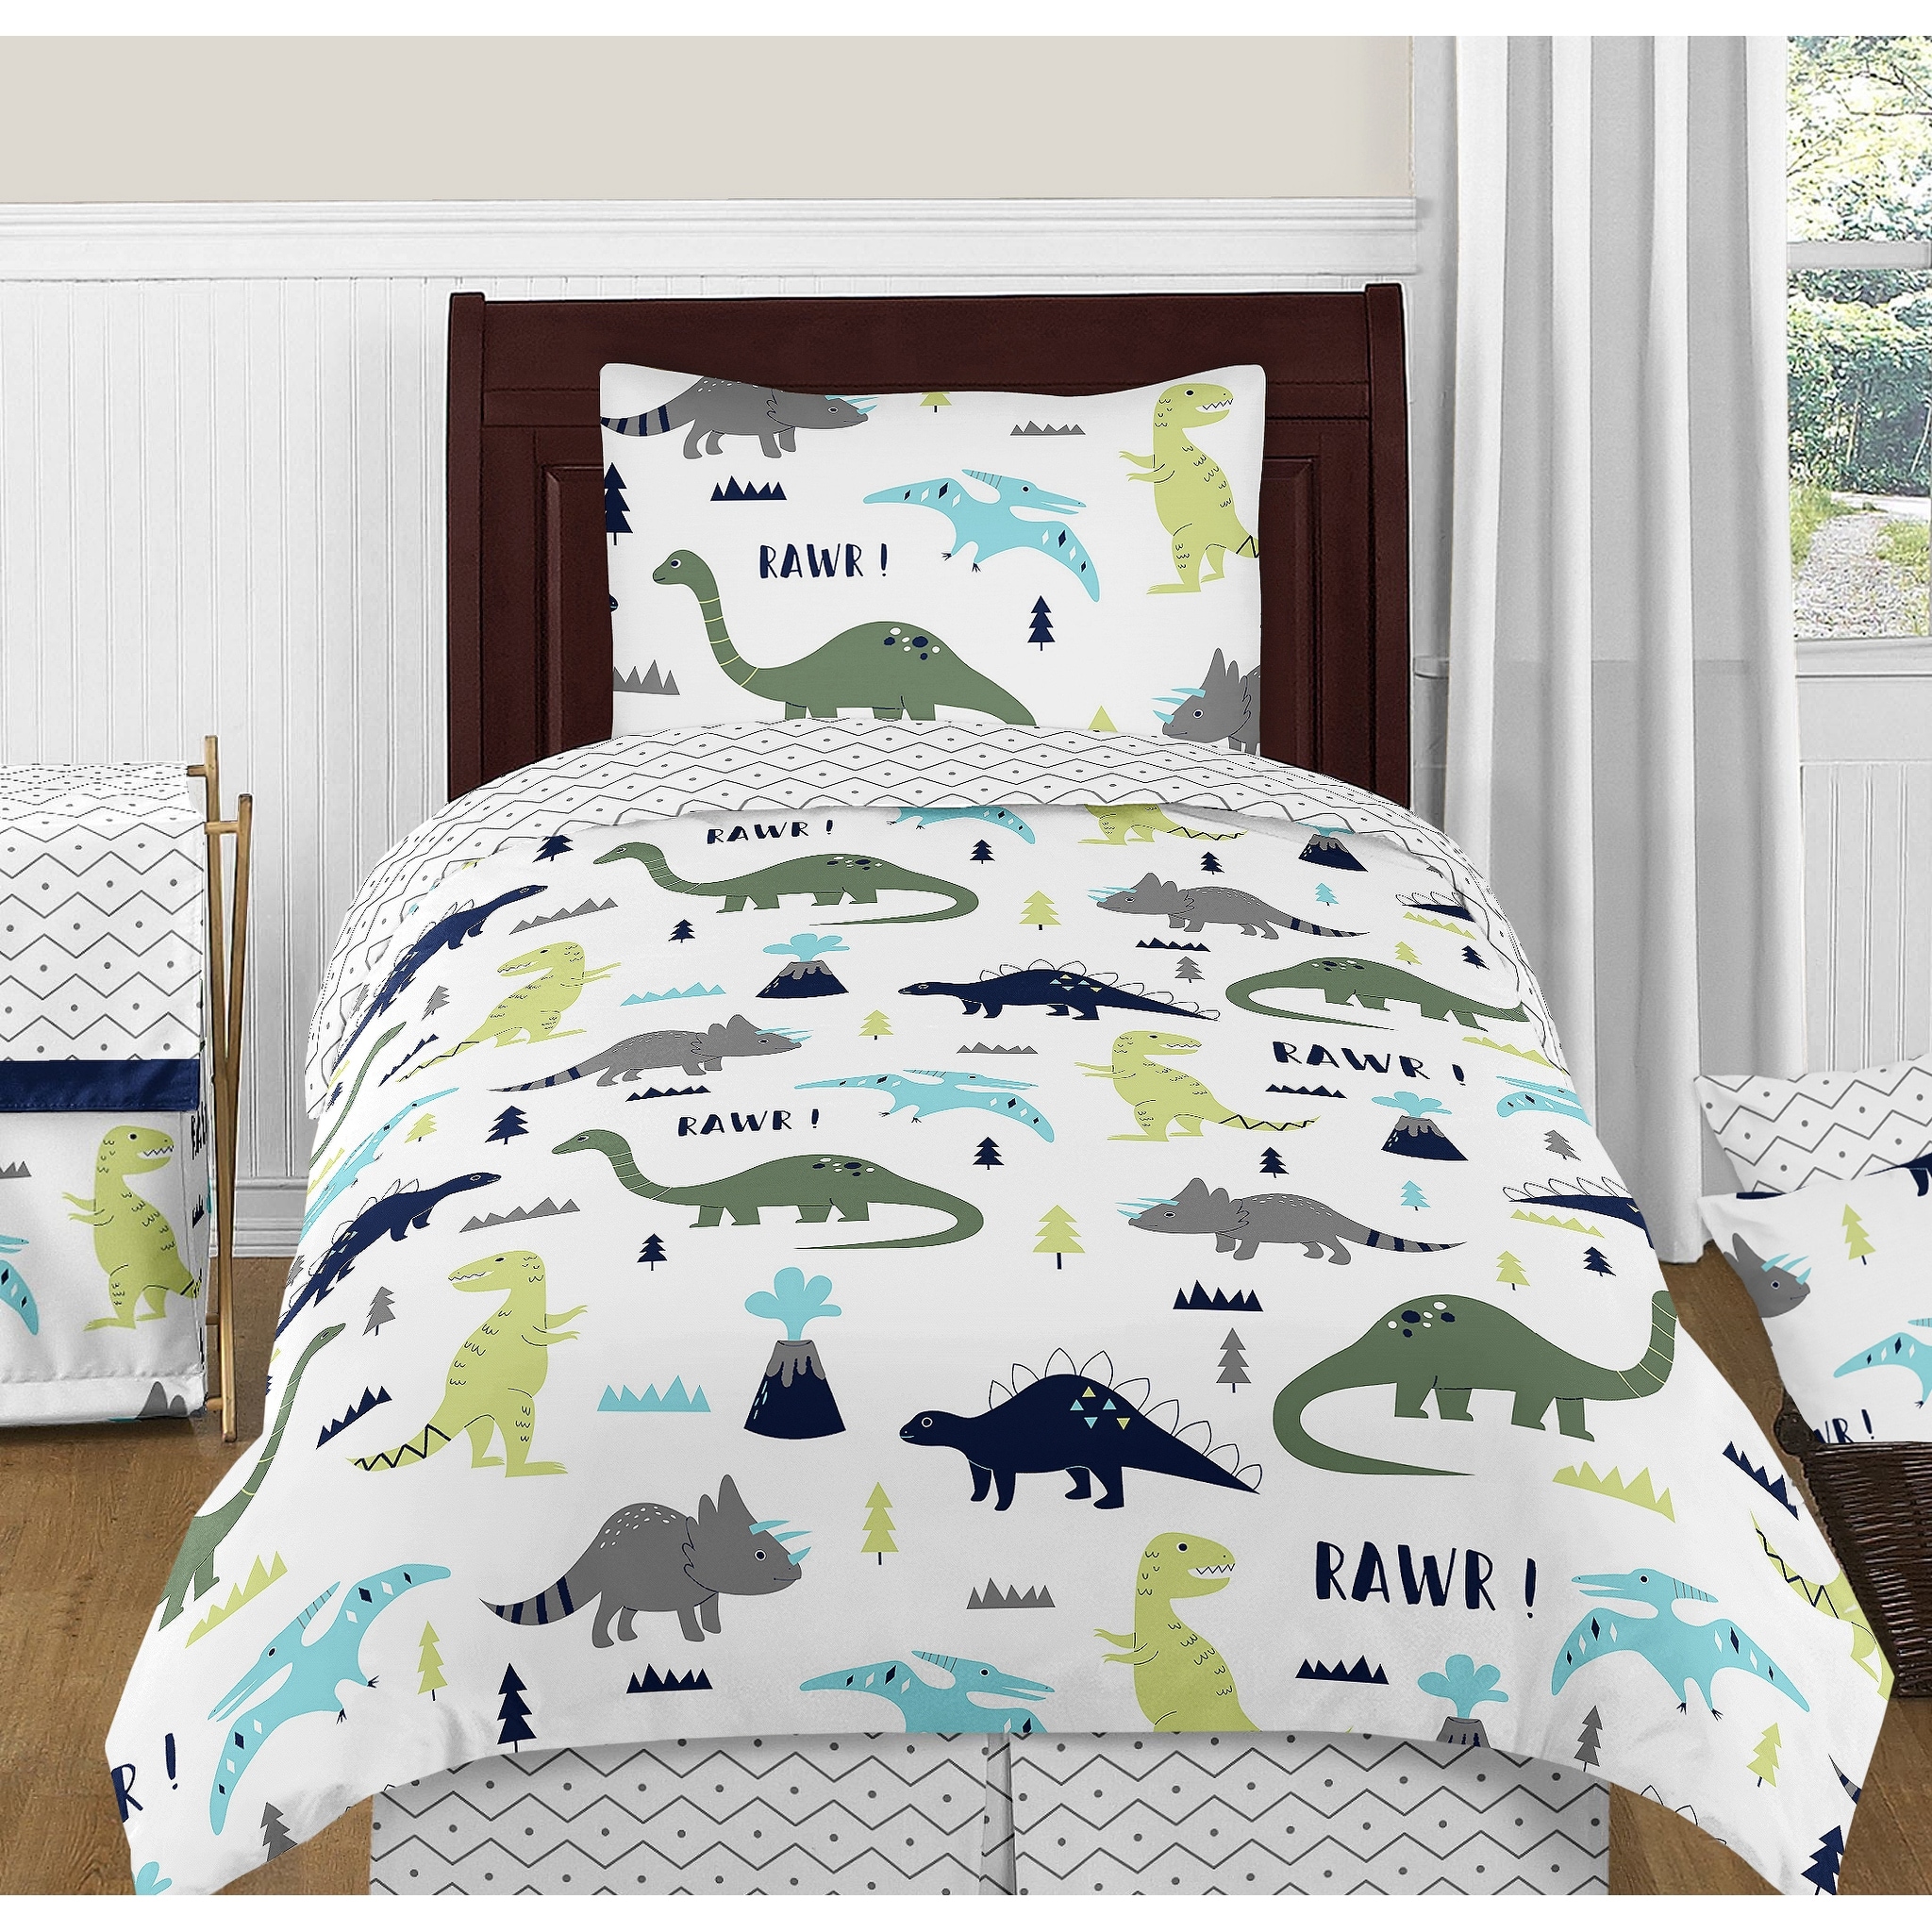 2 pc Twin Size Quilt Bedspread Kids/Teens Boys Girls DinosaursWhite Blue Green Orange Baby Dinosaours Multicolor Bedding New